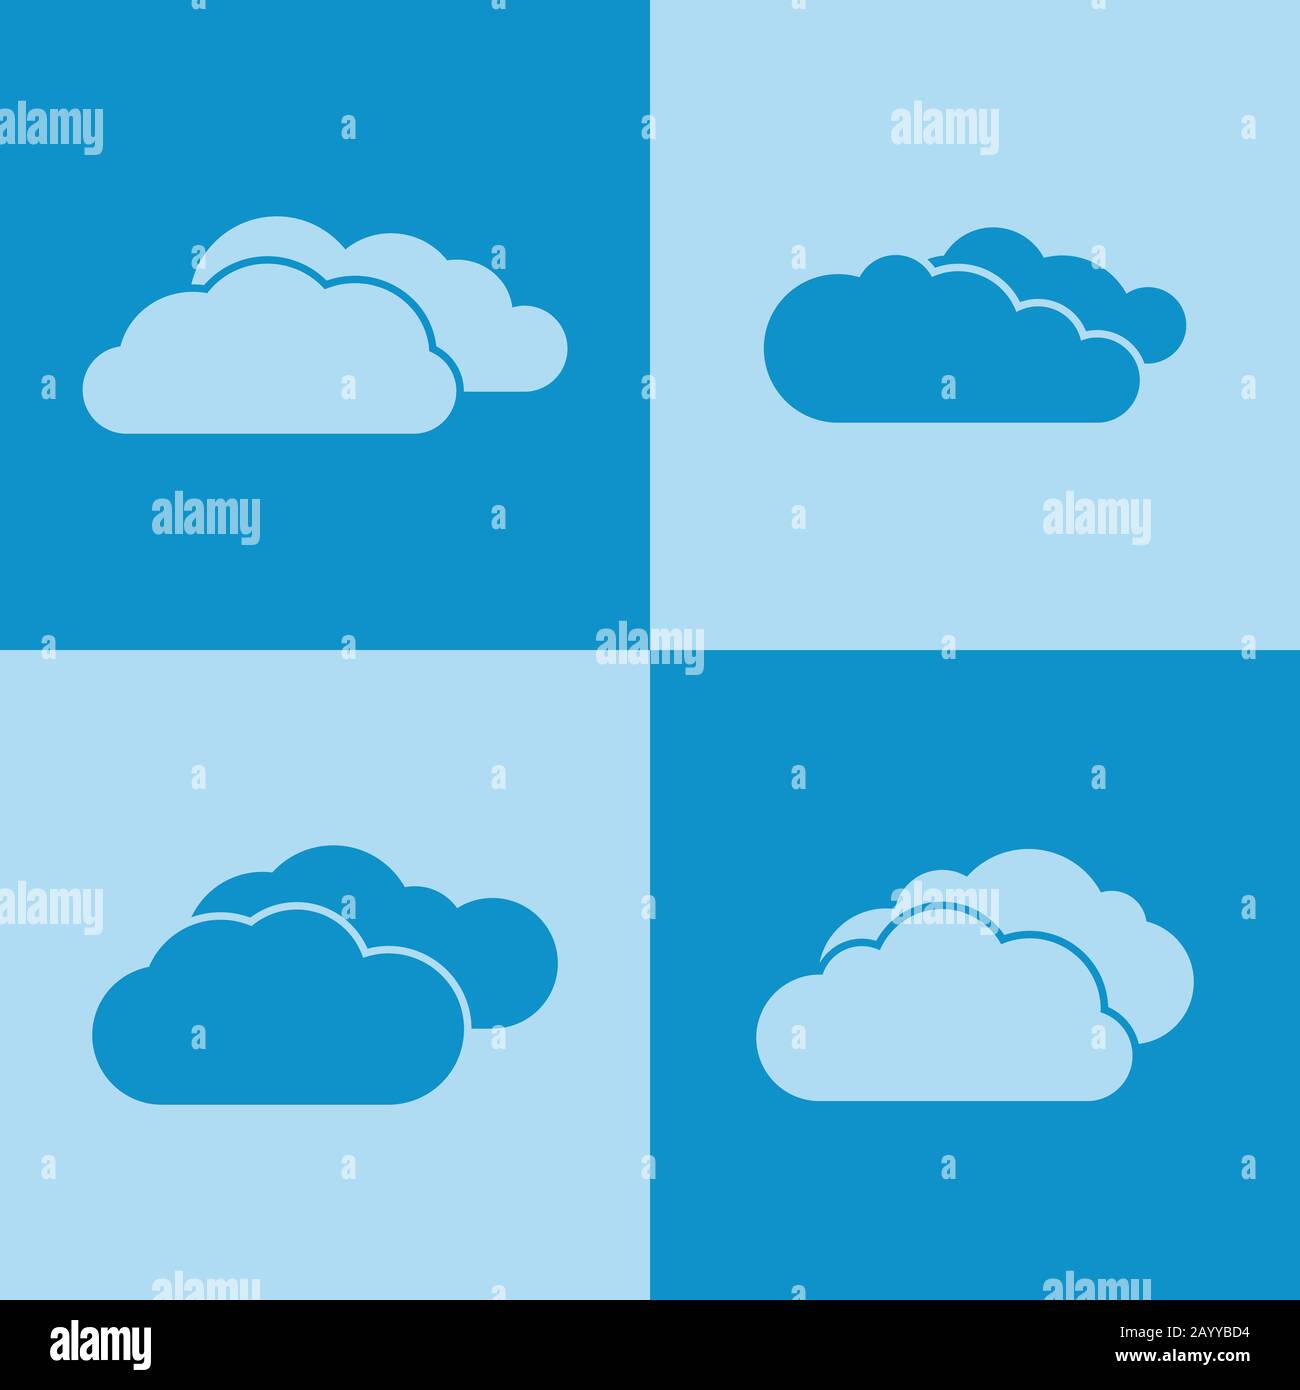 Cloud icons on blue background. Weather clouds and internet ...